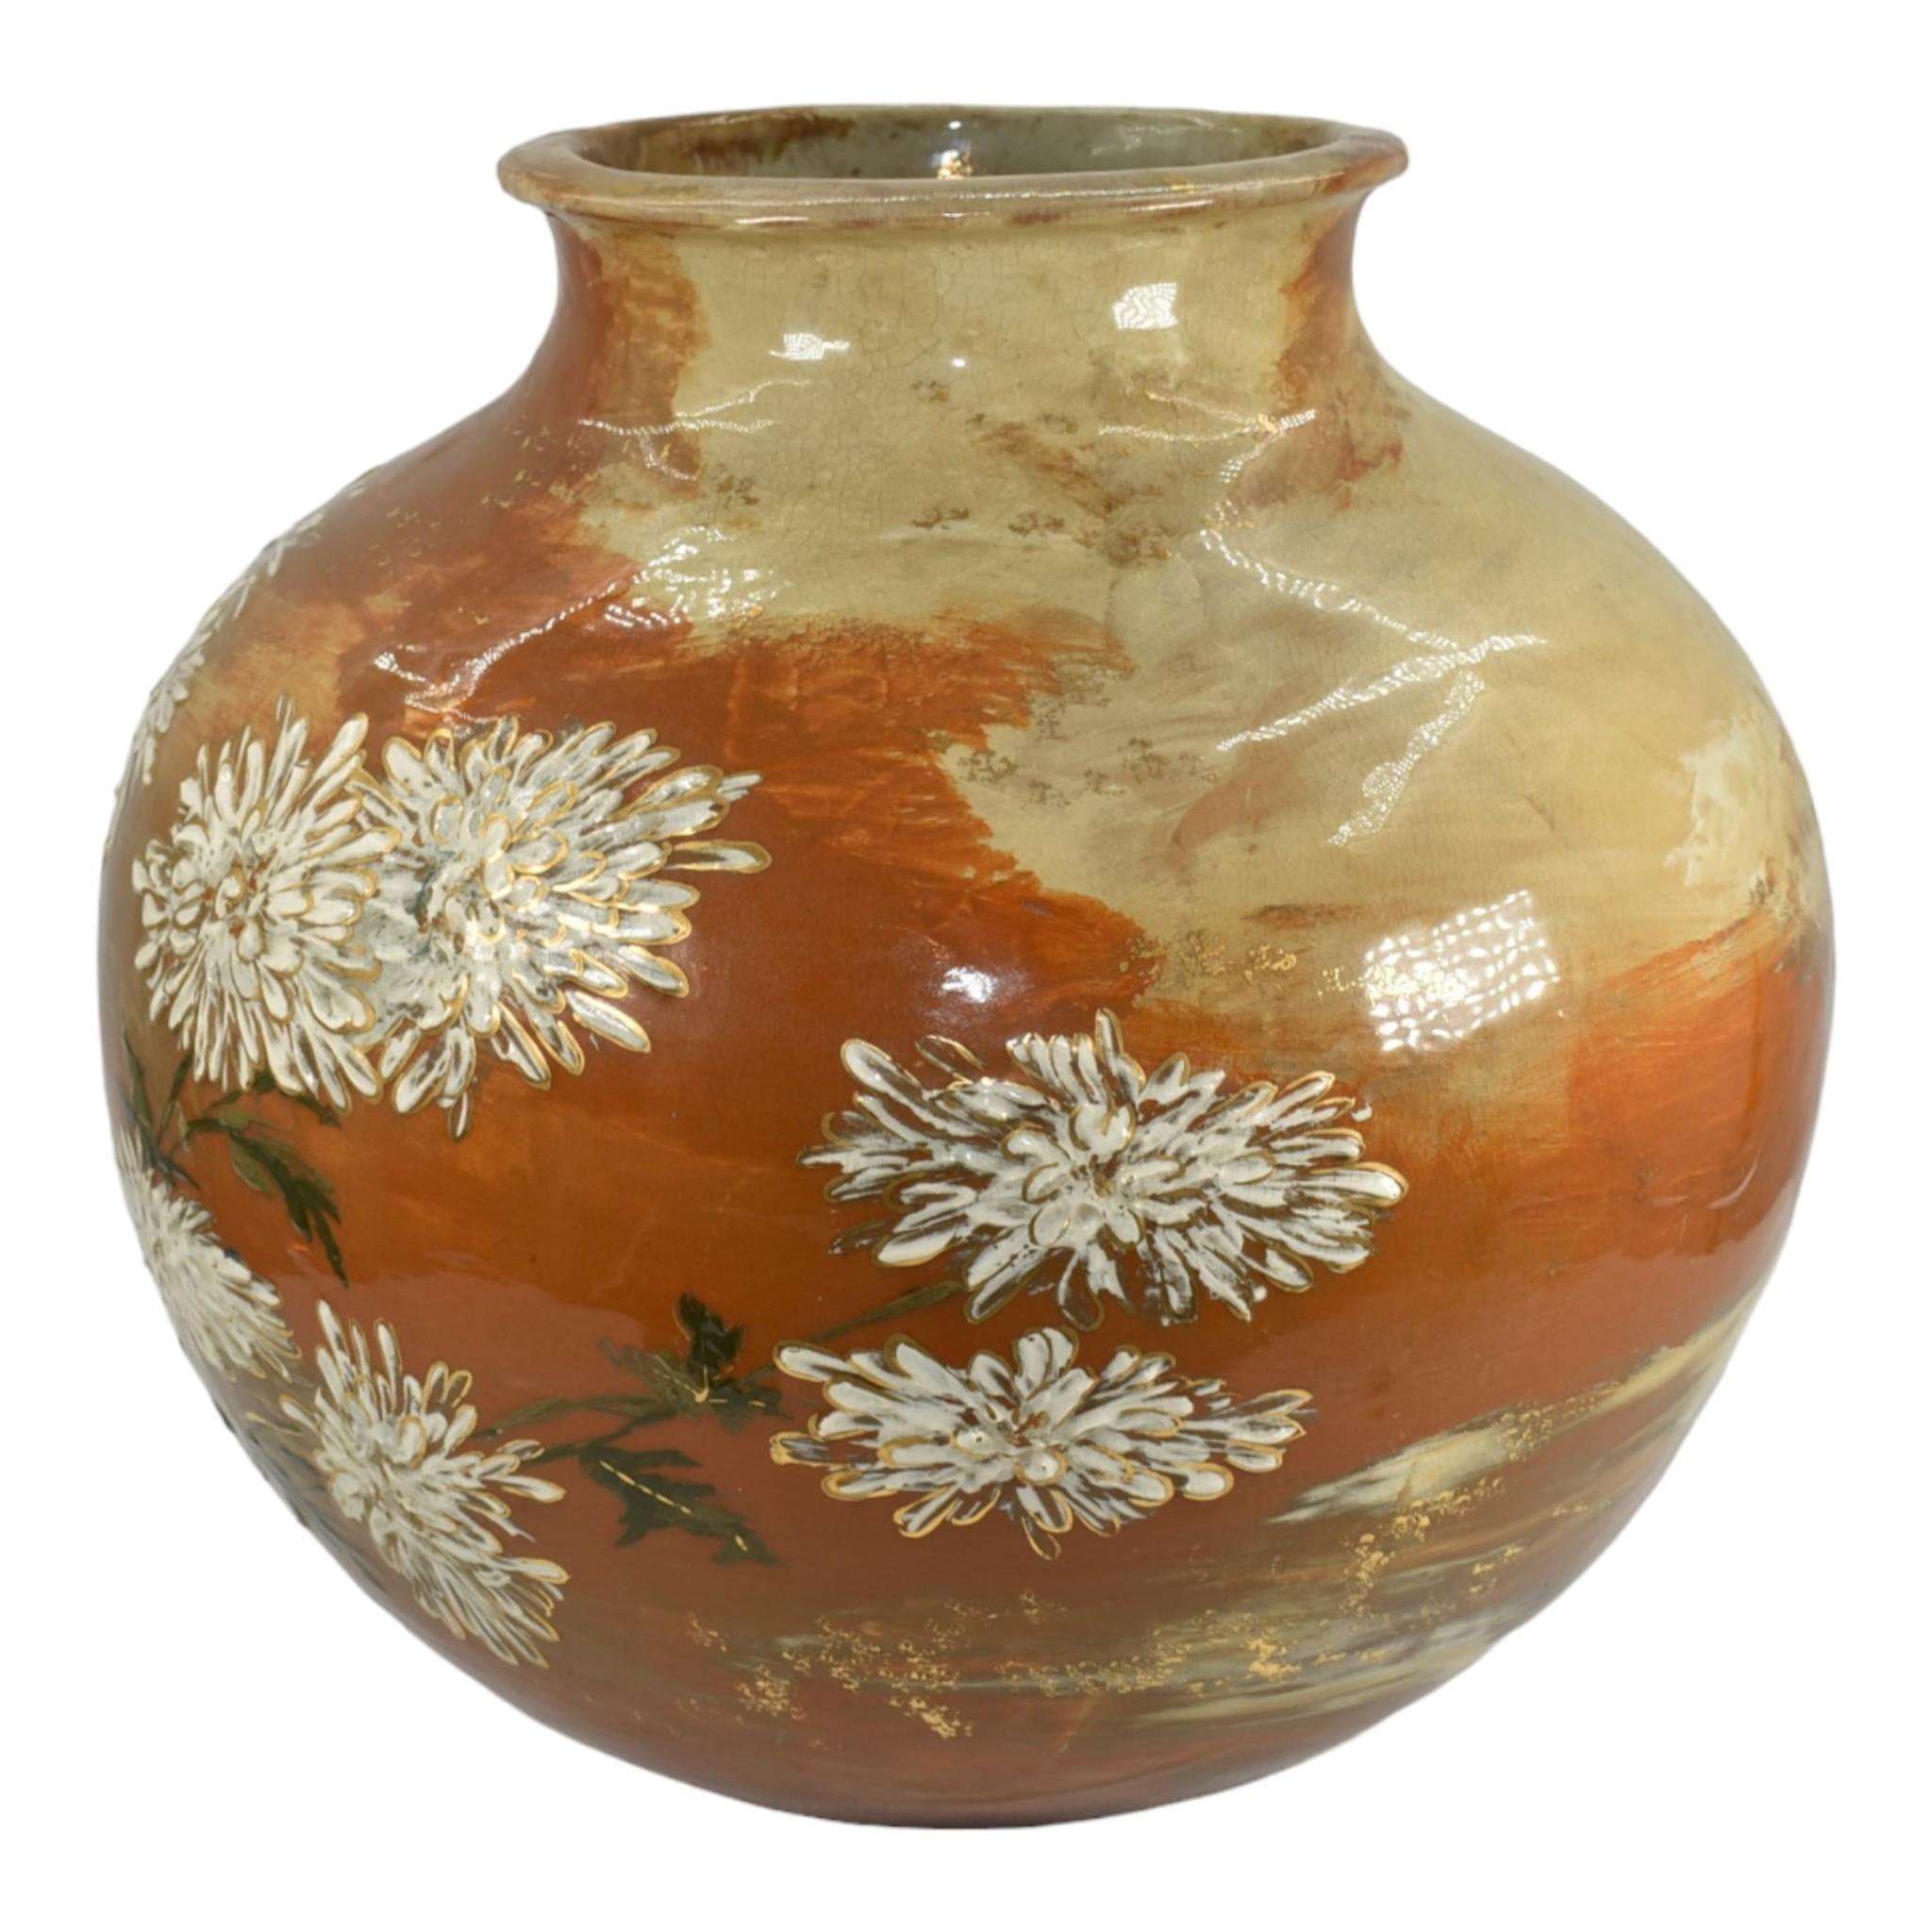 Rookwood 1833 Vintage Pottery Limoges Orange Chrysanthemum Jardiniere Fry
Massive, museum quality limoges glaze bulbous jardiniere, hand painted with white chrysanthemum flowers and gold accents by Laura Fry in 1883. 
Excellent condition.